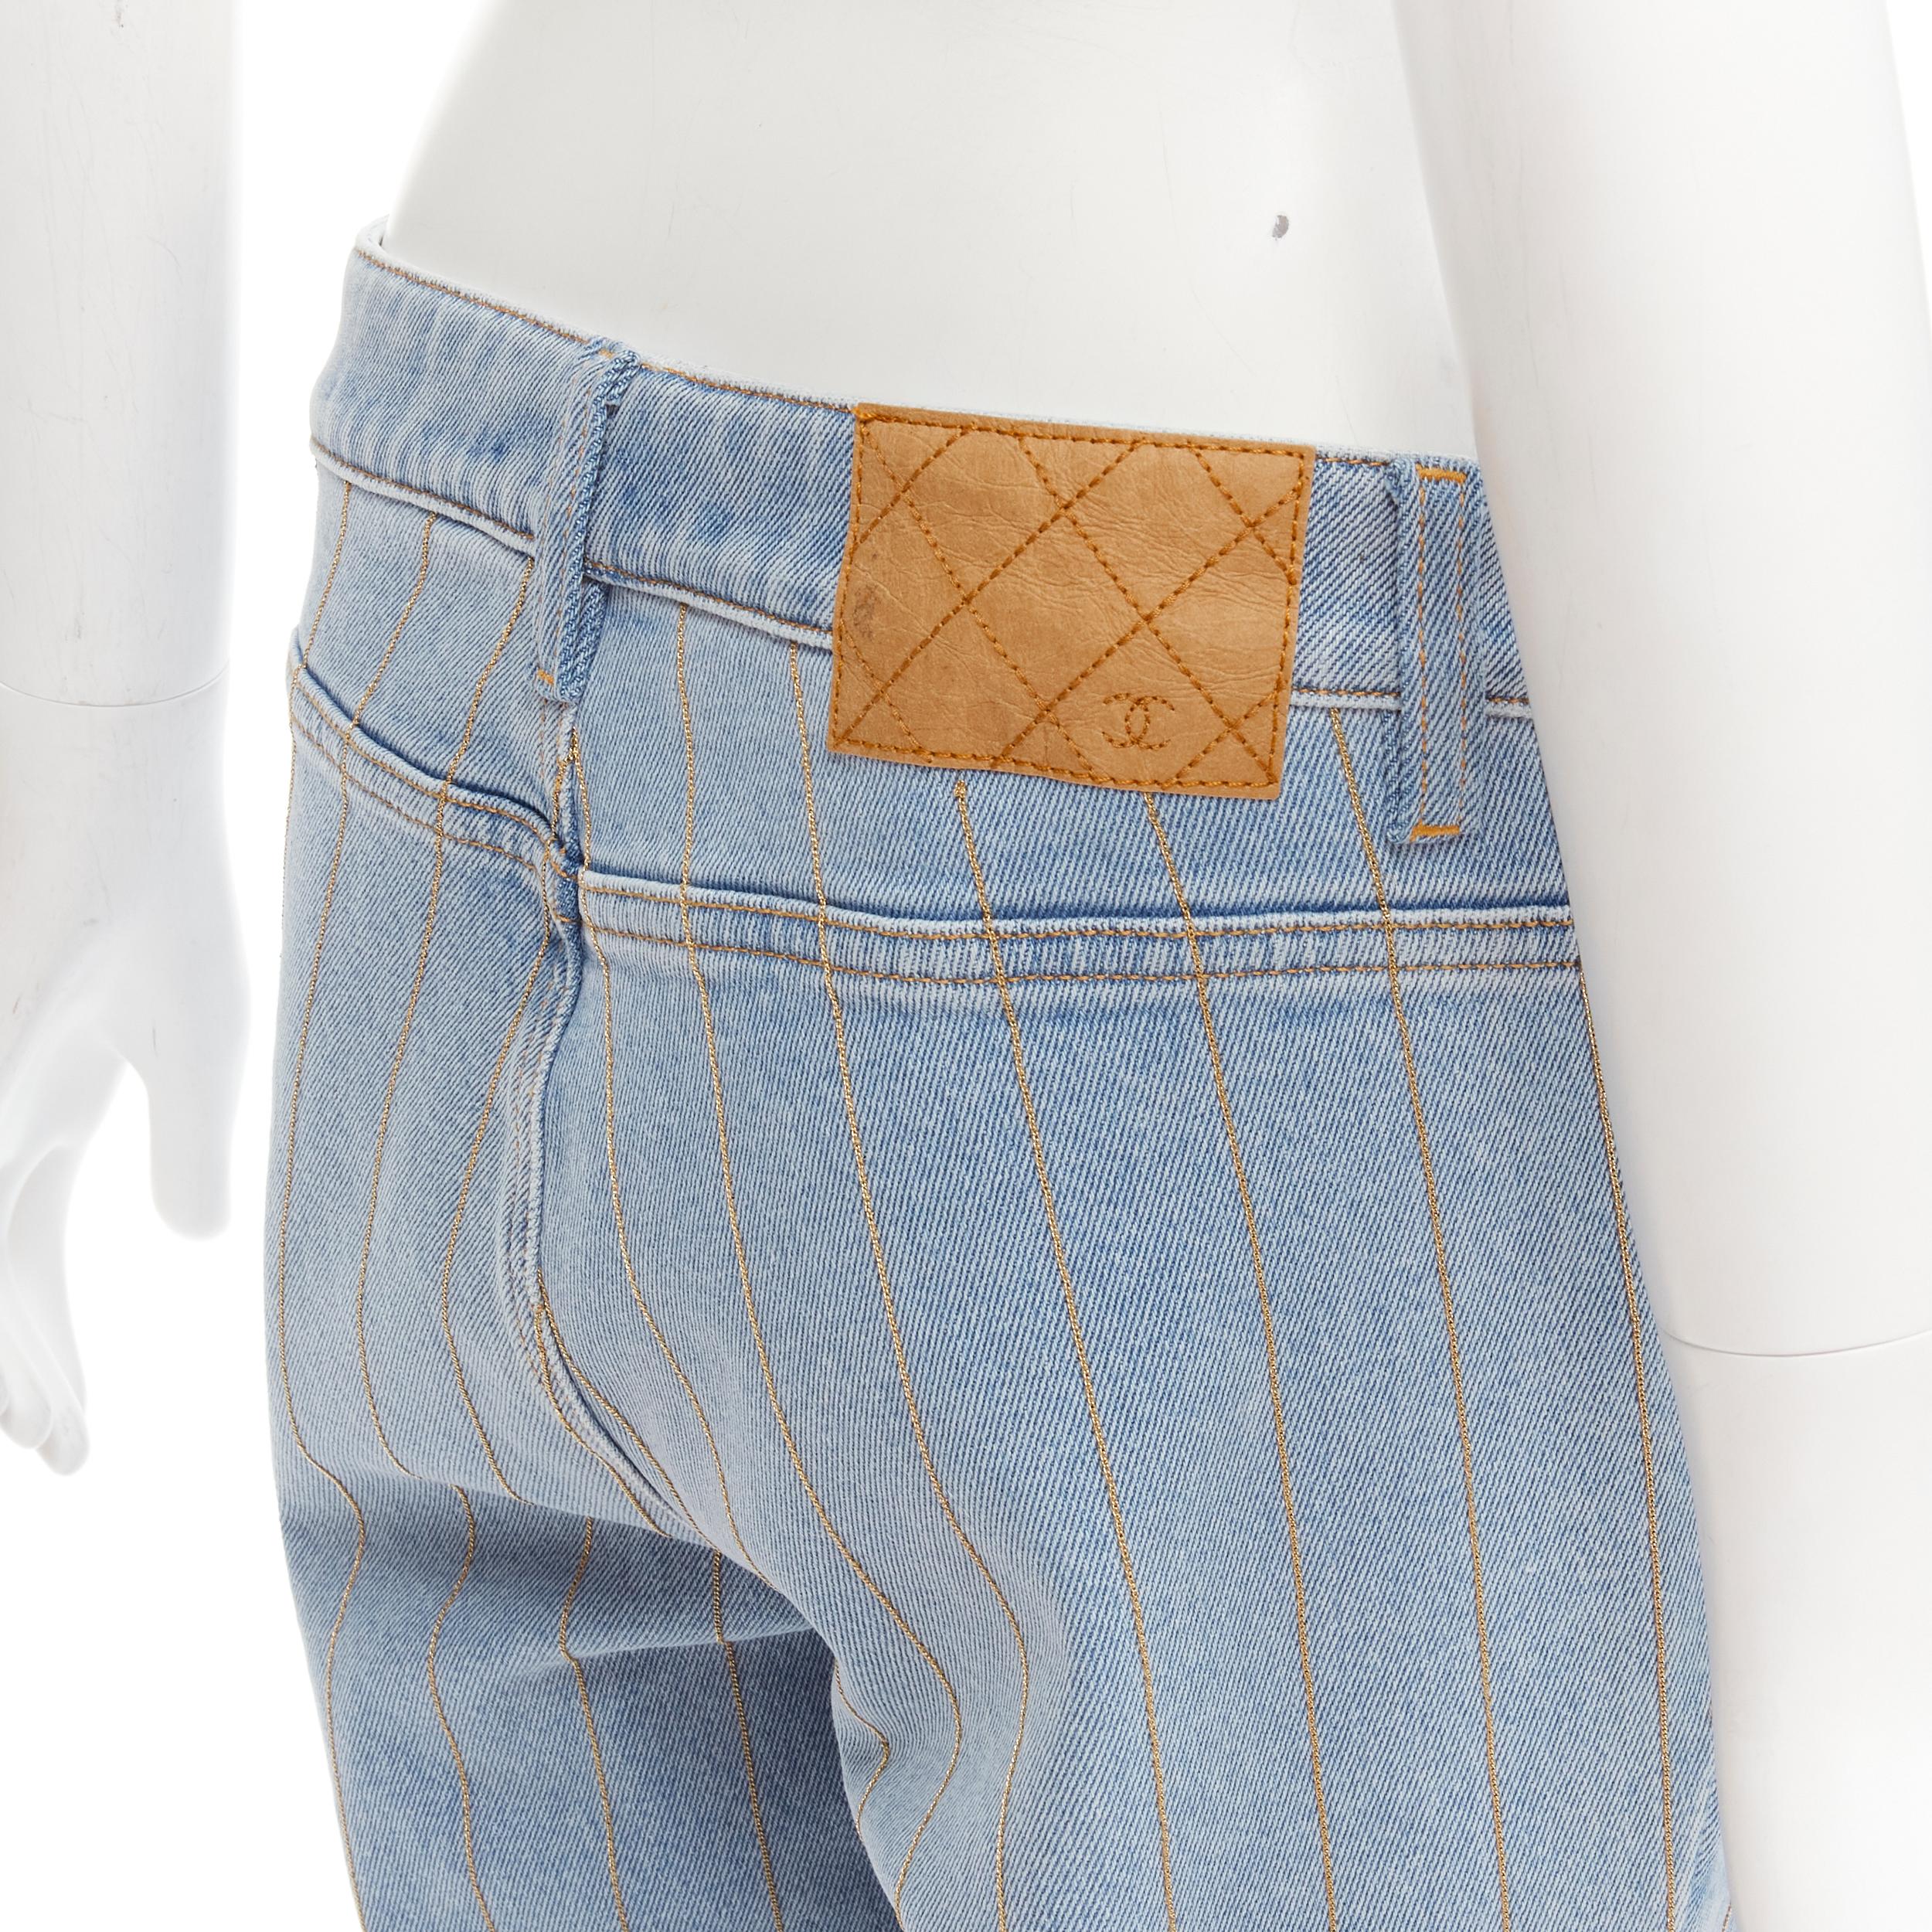 CHANEL light washed blue denim gold chain embroidery straight leg jeans FR40 M
Brand: Chanel
Material: Cotton
Color: Blue
Pattern: Striped
Closure: Zip Fly
Extra Detail: Champagne-tone hammered CC button. Concealed zip fly. Double patch front